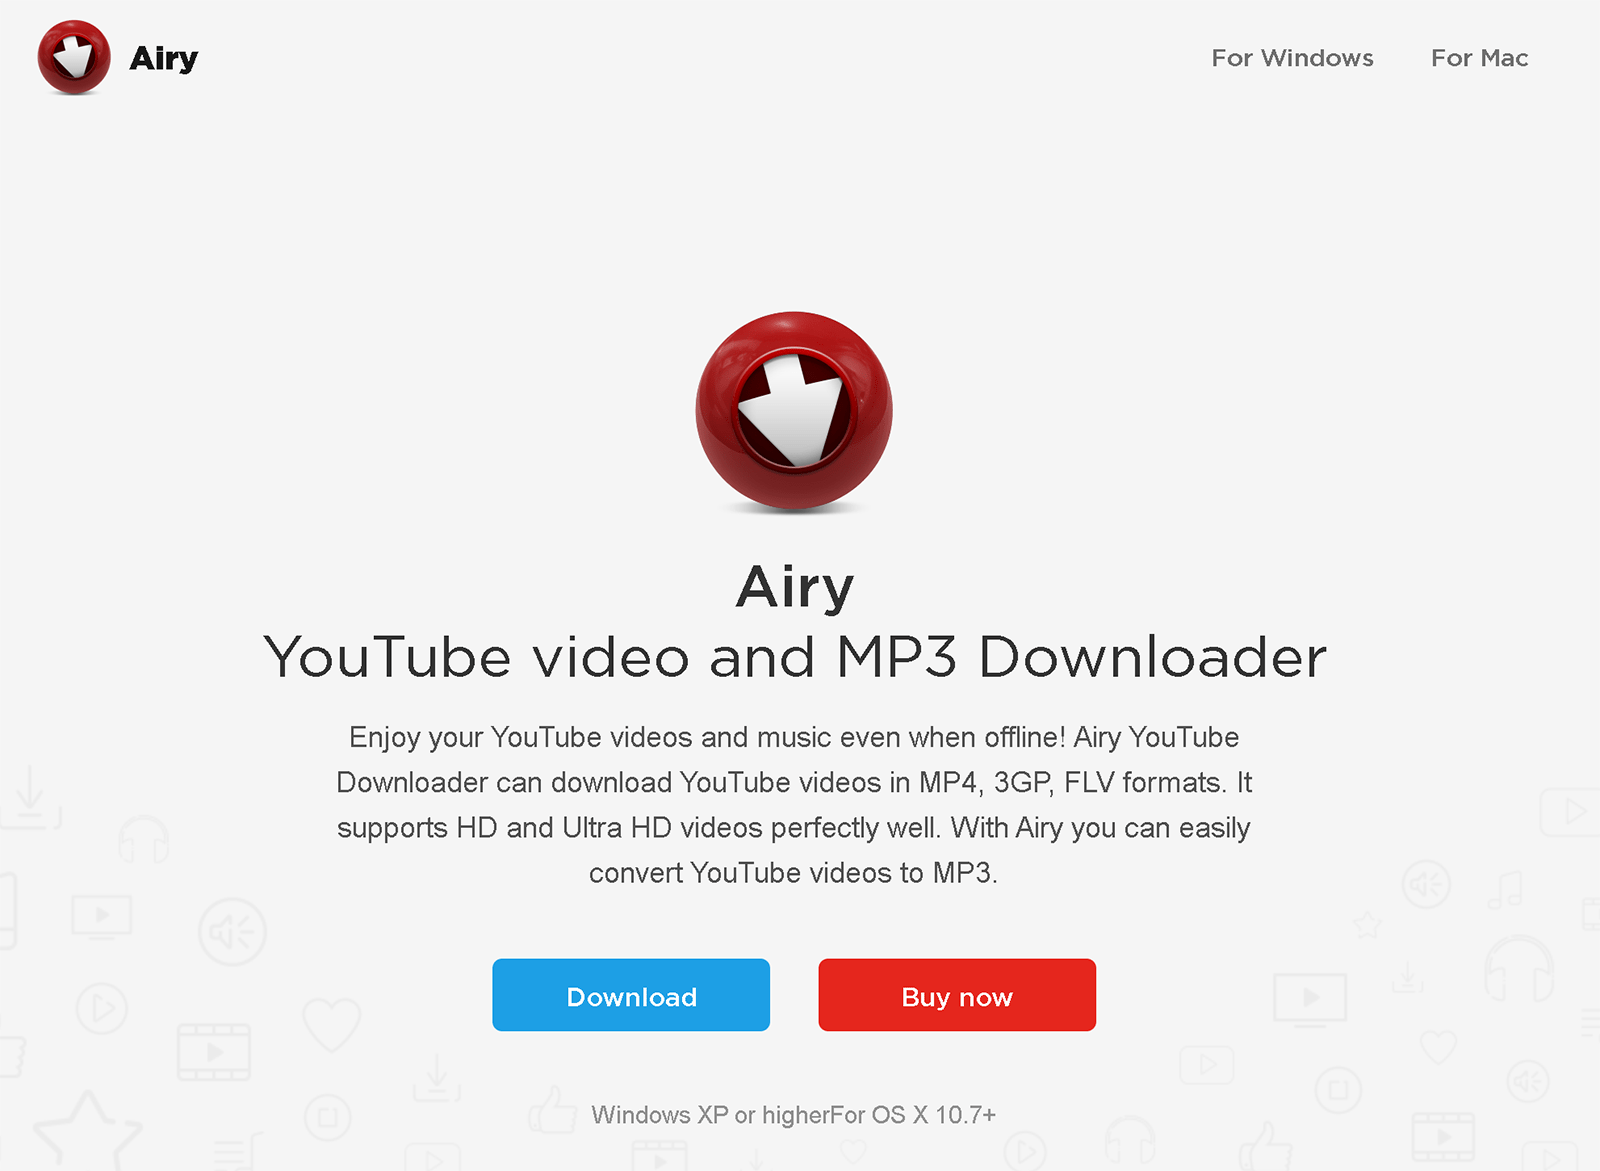 youtube downloader for mac hd